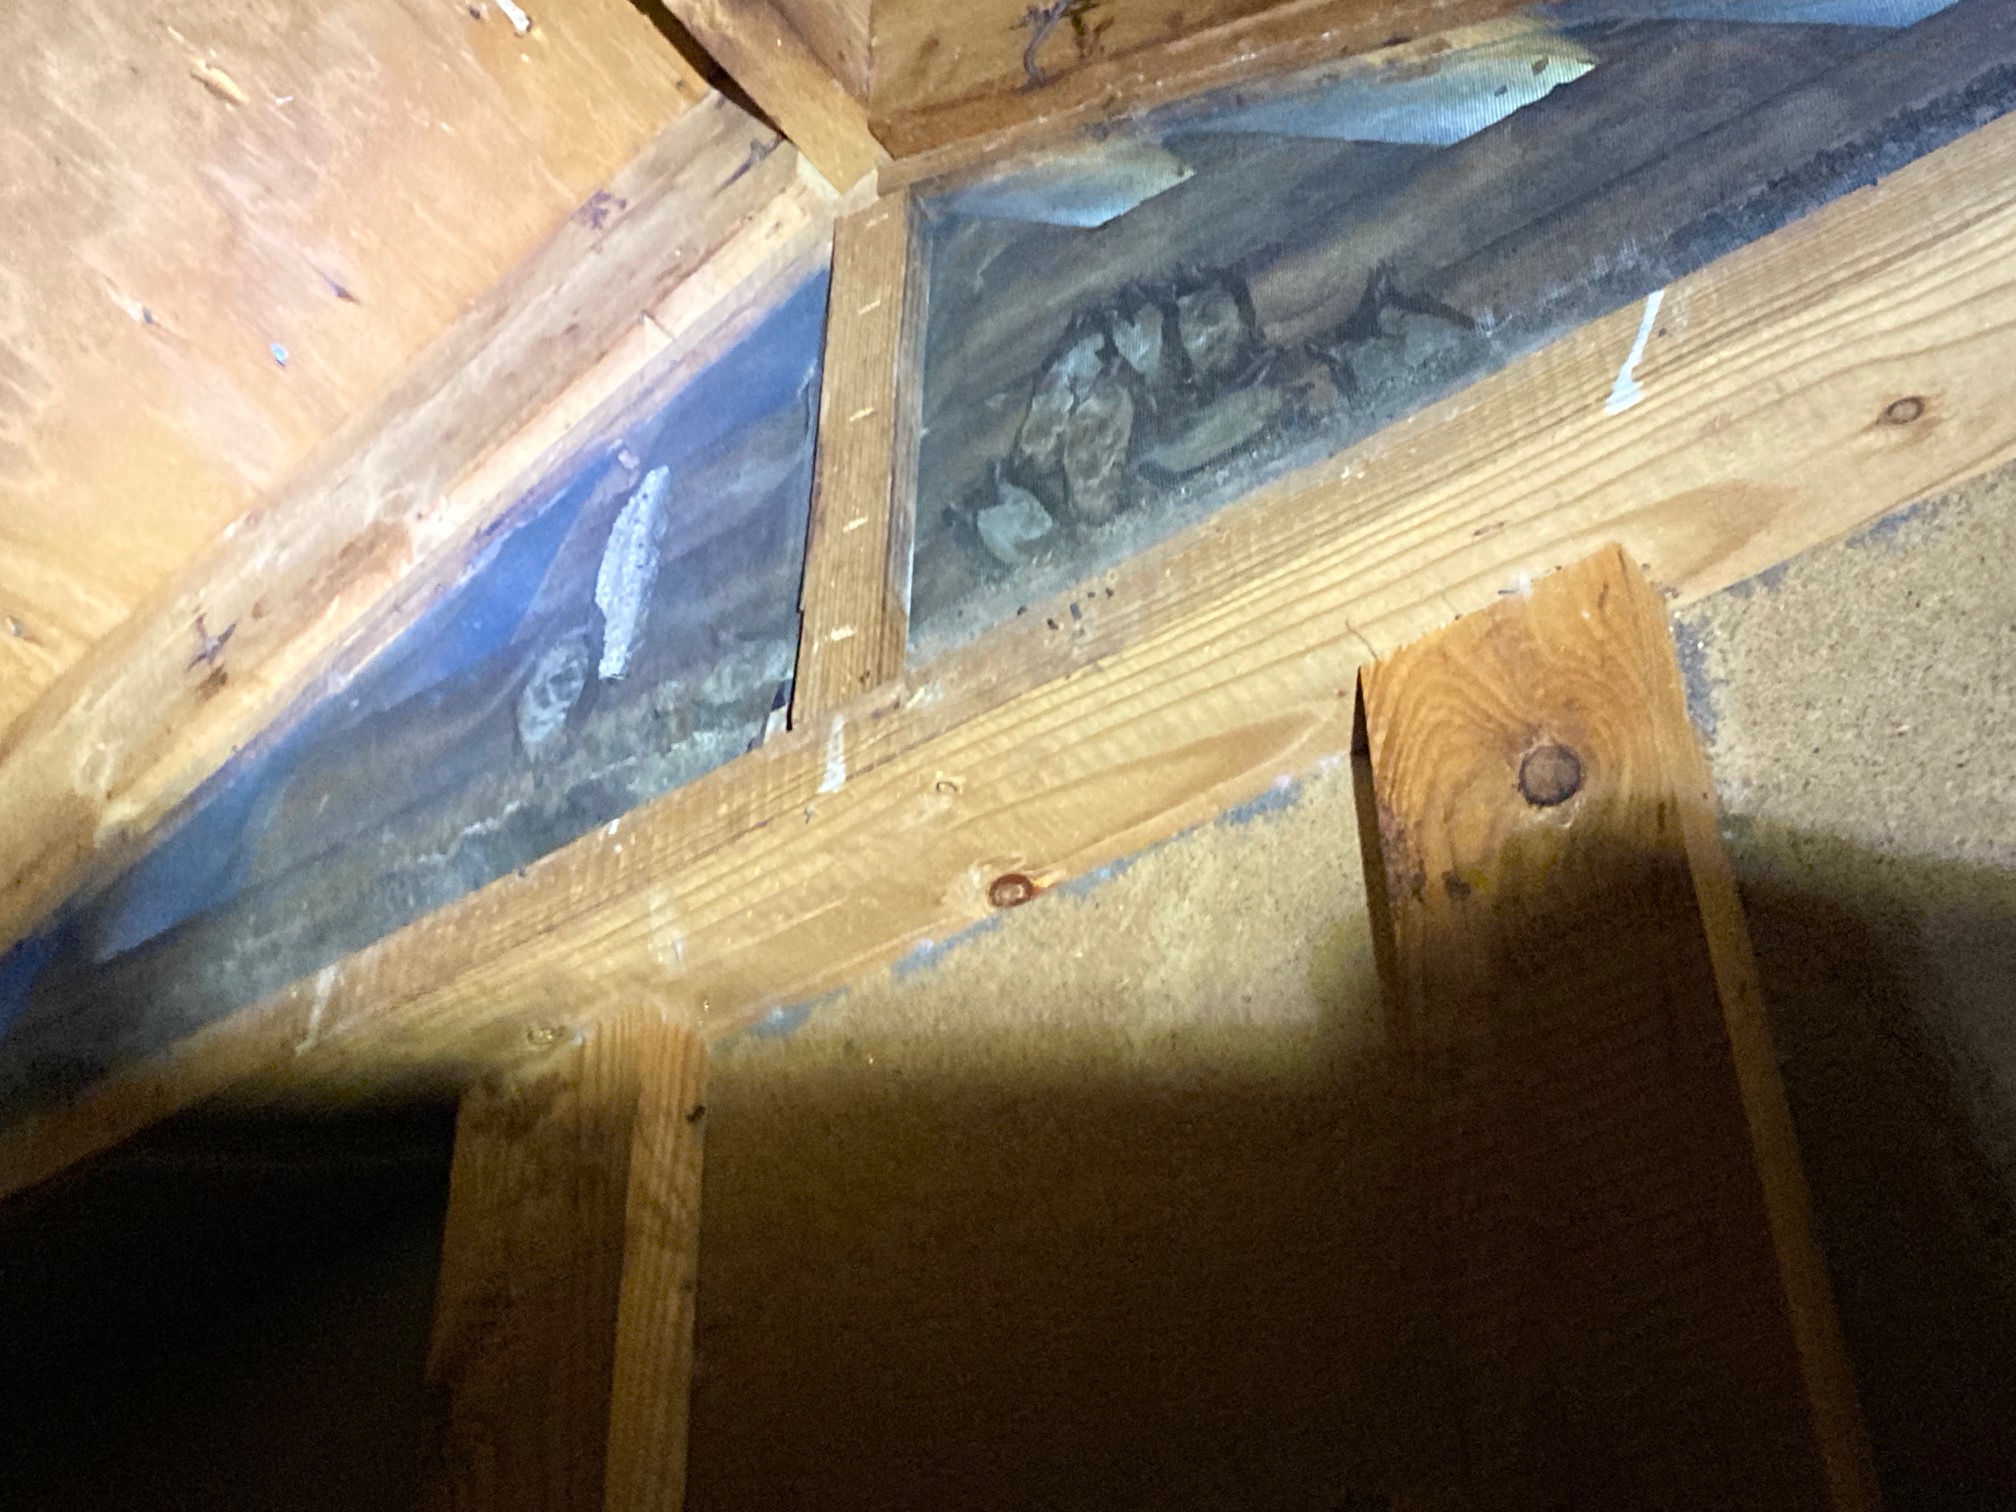 bats roosting in gable vent